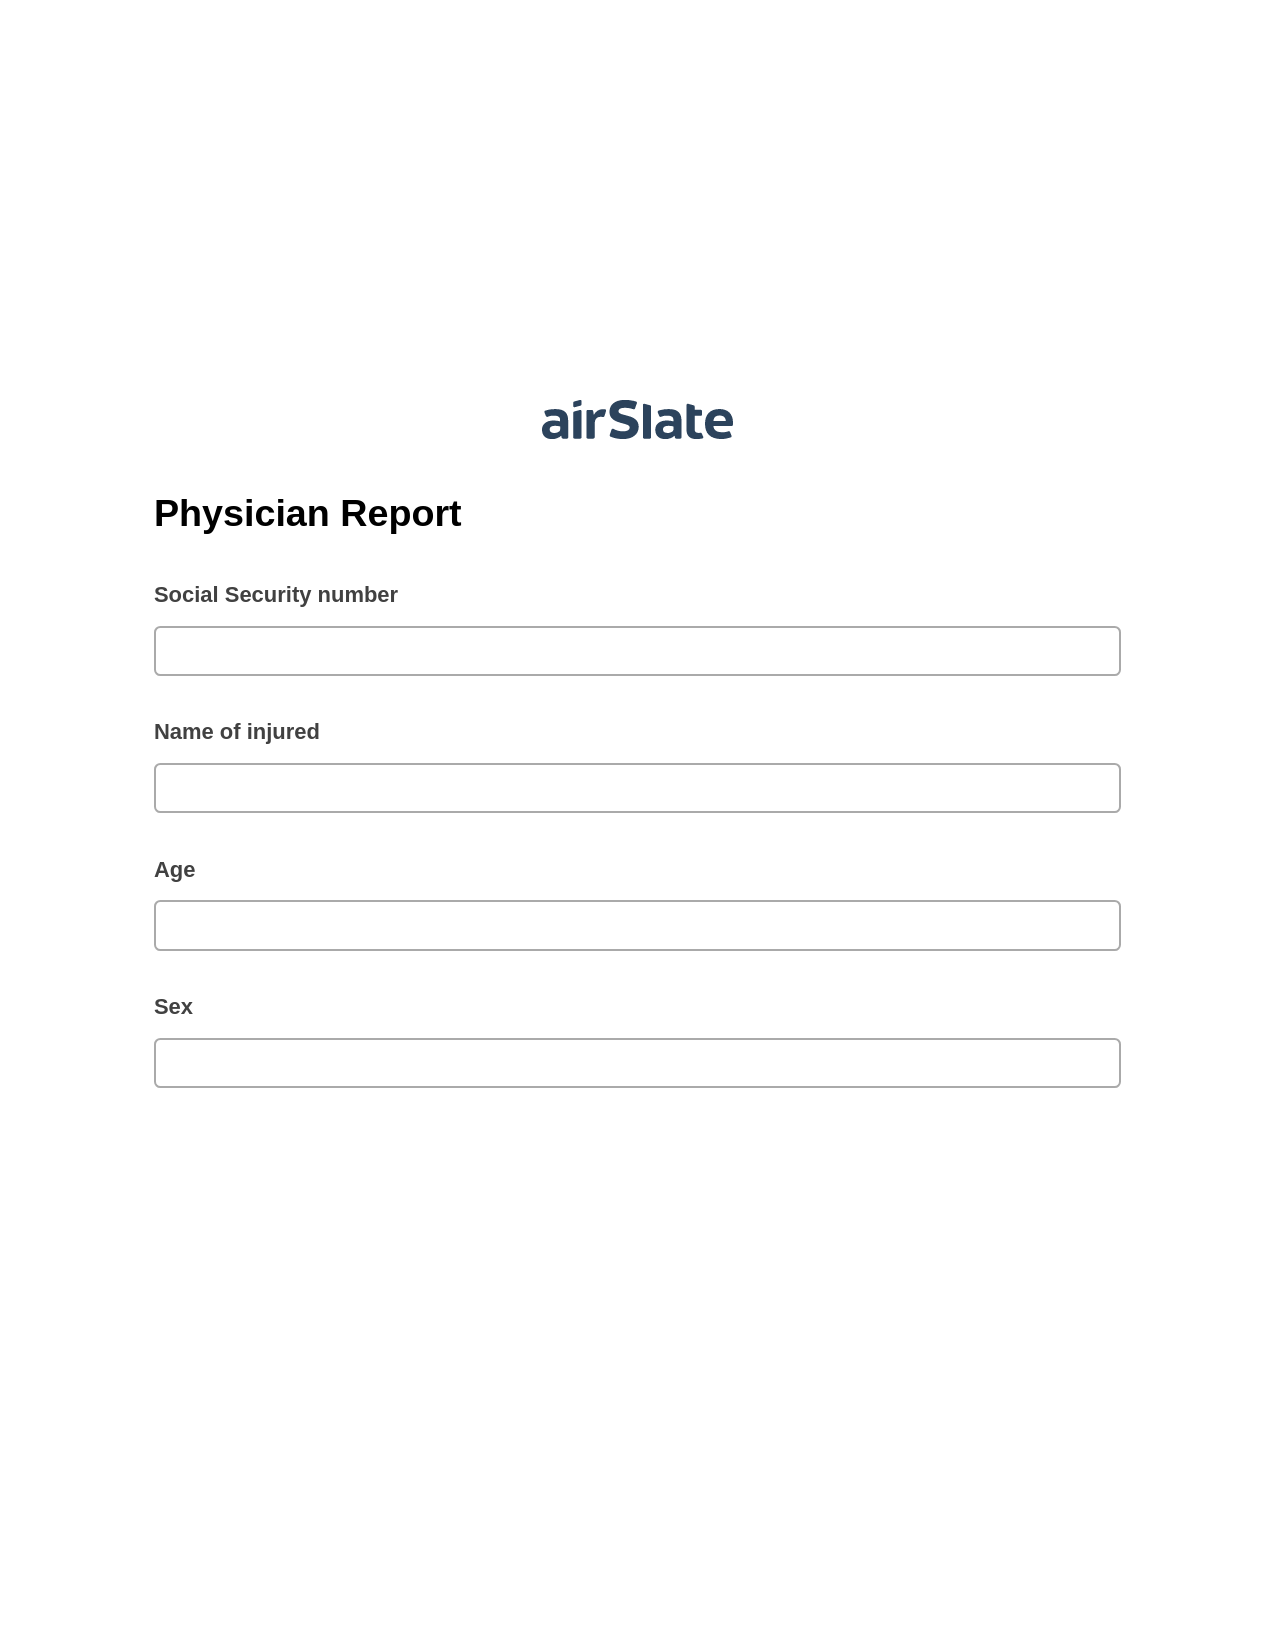 Physician Report System Bot - Slack Two-Way Binding Bot, Update NetSuite Record Bot, Post-finish Document Bot